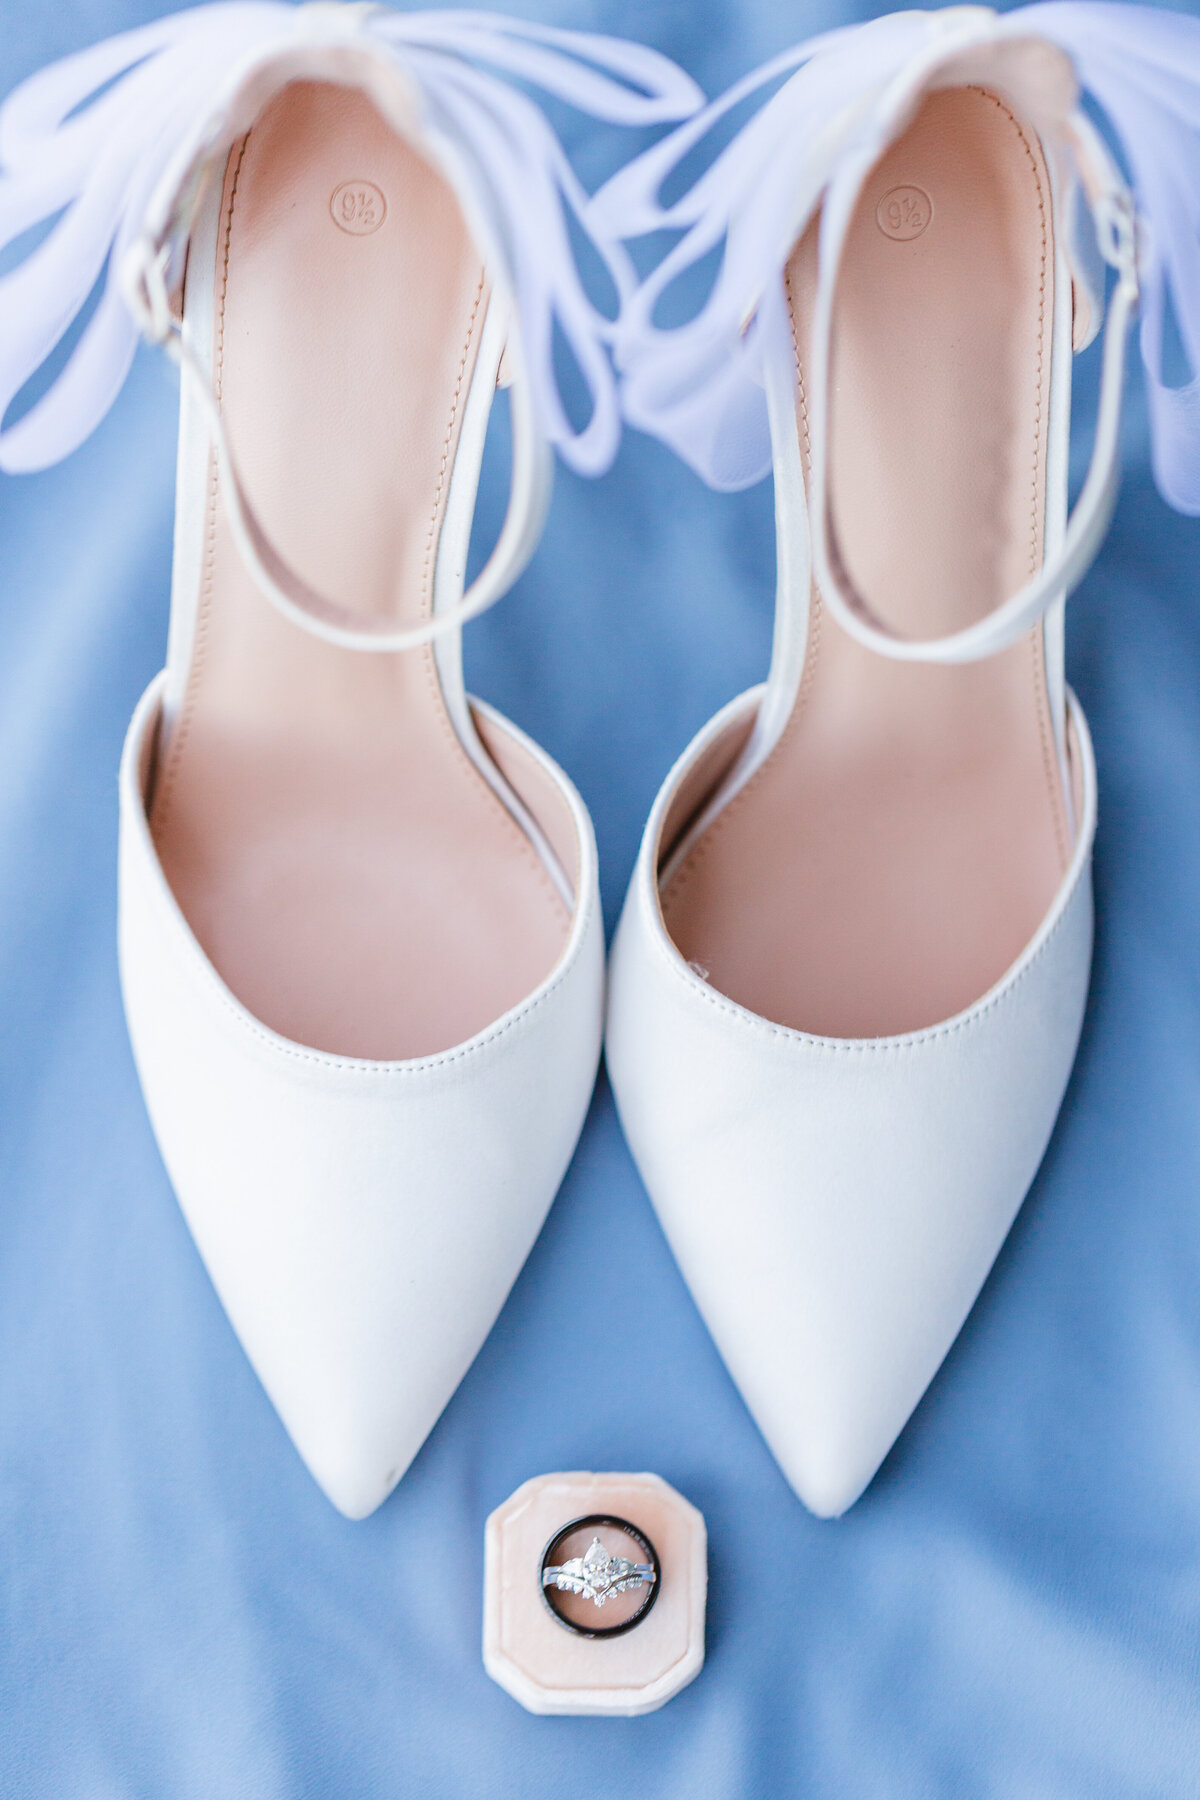 white bride shoes with wedding rings on a blue background